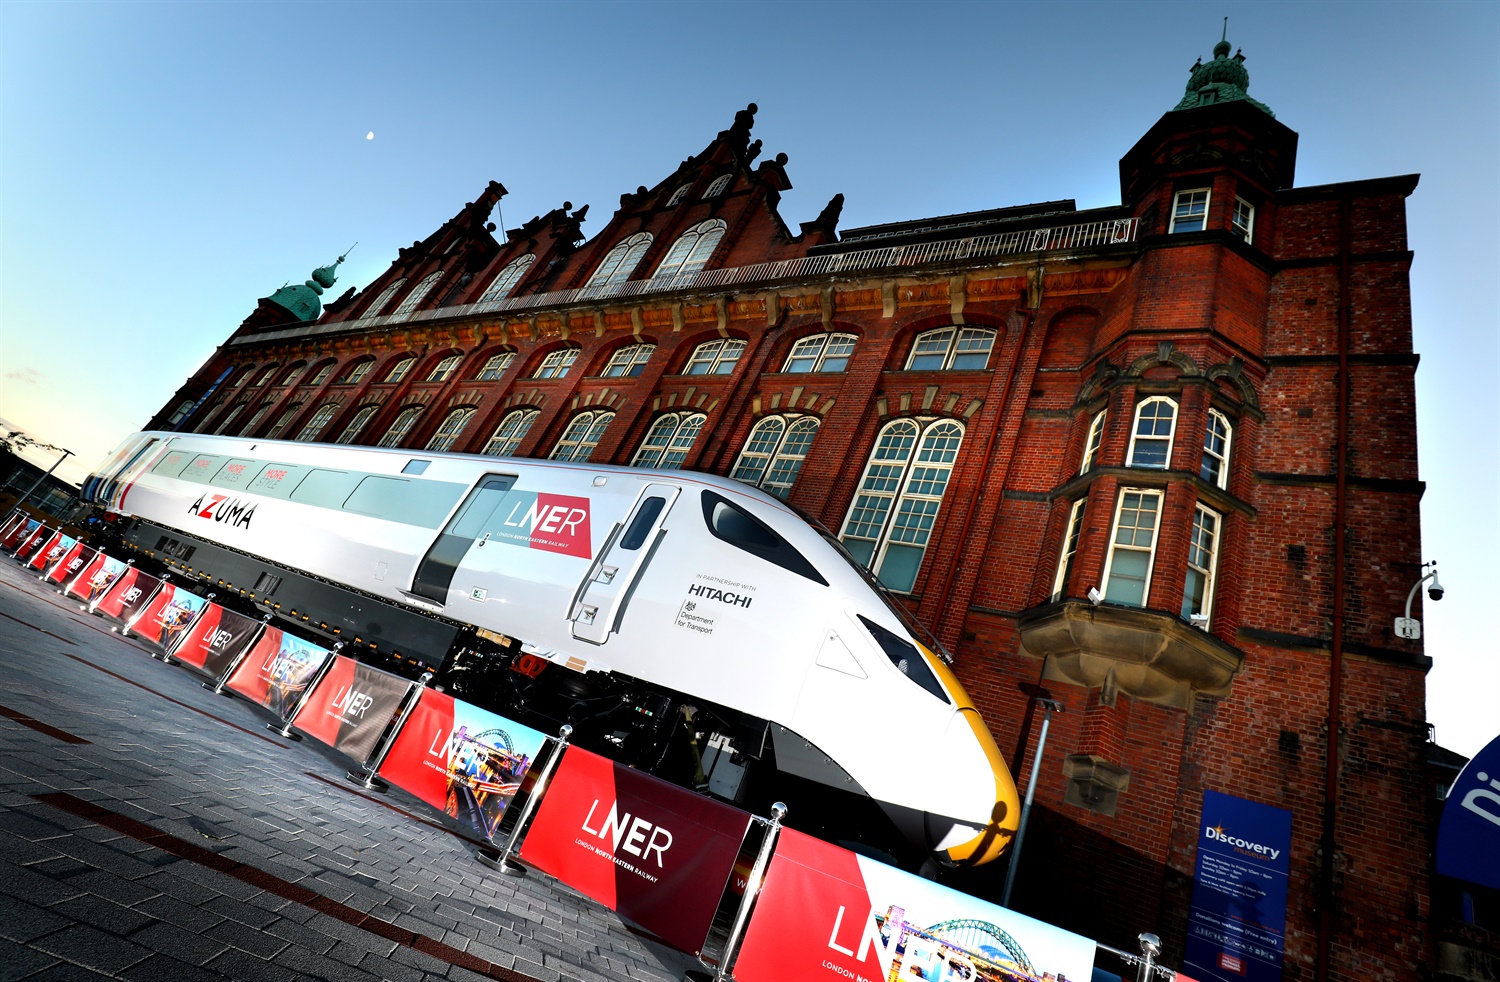 LNER: Business as usual